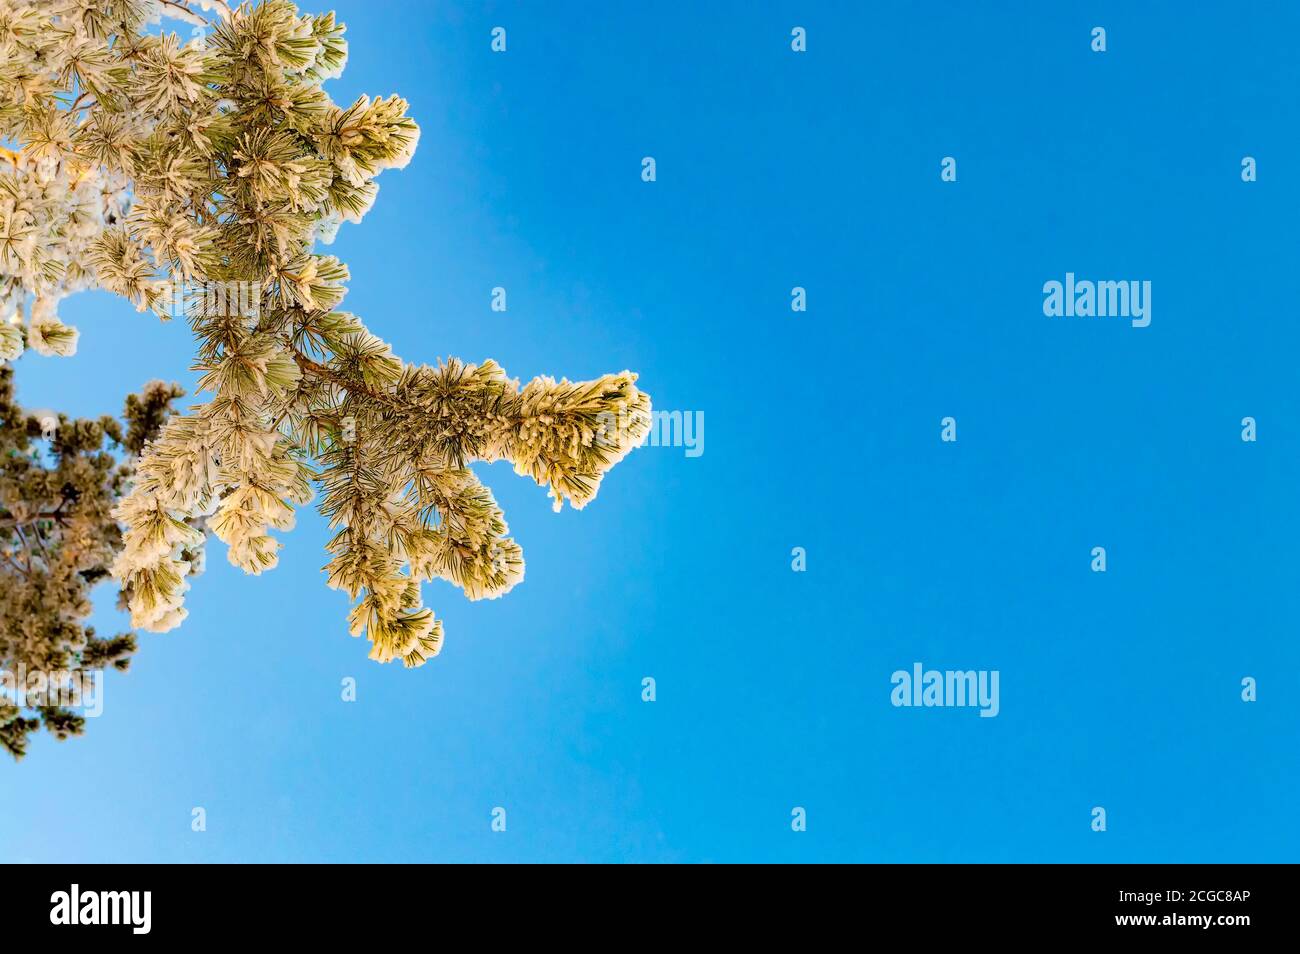 Branch of Siberian pine in snow against sky. Place to text. Stock Photo